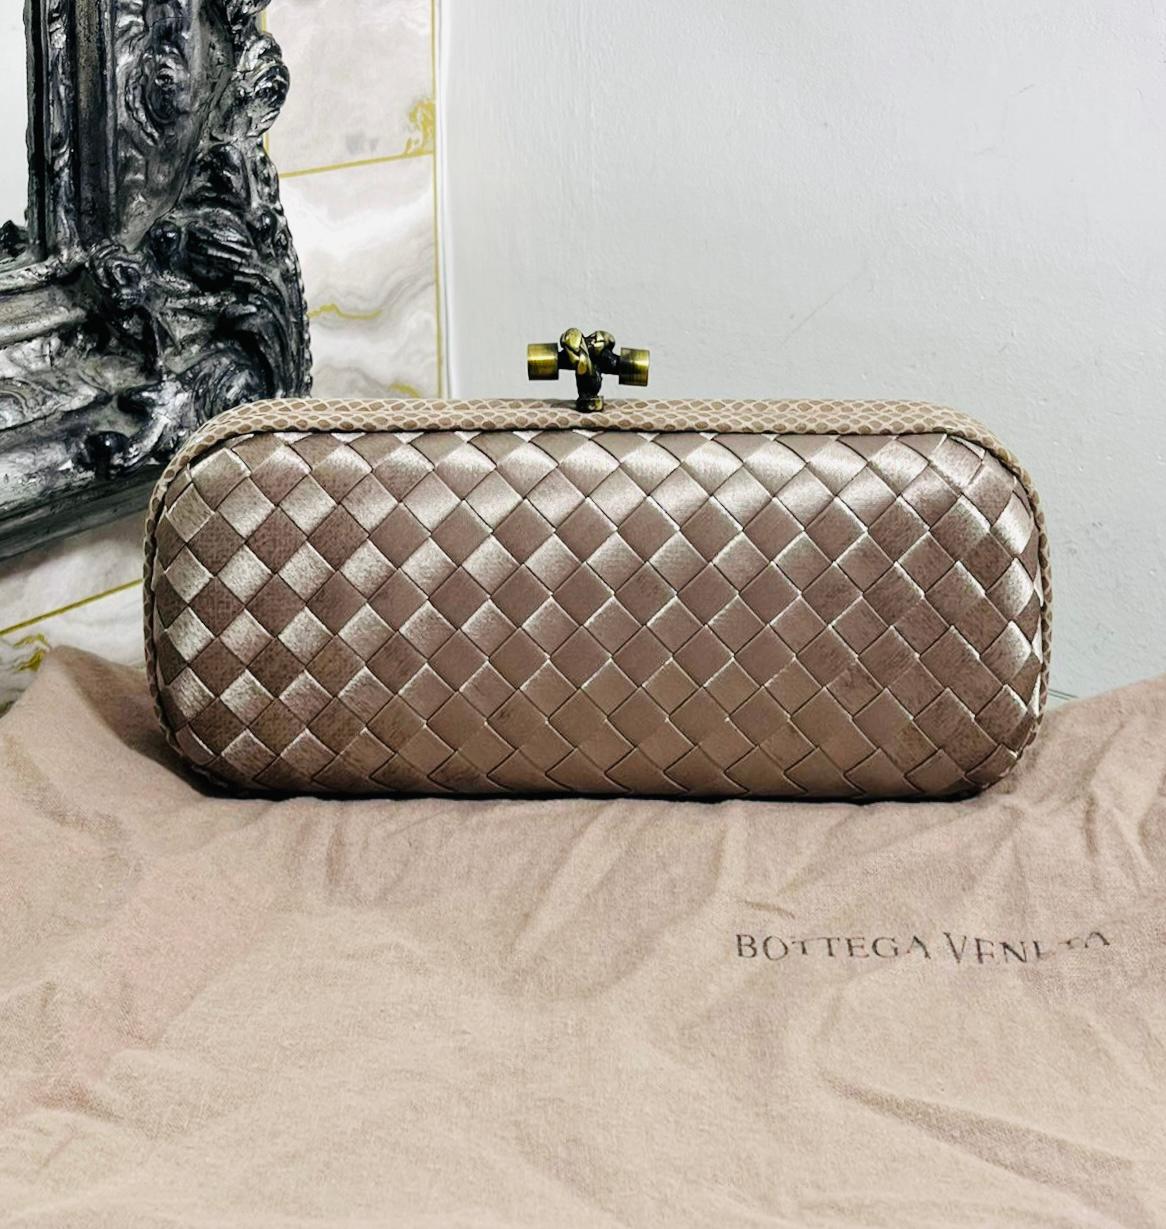 Bottega Veneta Satin & Snakeskin Trim Top Knot Clutch Bag

Structured, champagne bag designed with the brand's signature Intrecciato weave.

Featuring antique gold knot twisted closure and tonal snakeskin trimming.

Size – Height 10cm, Width 24cm,